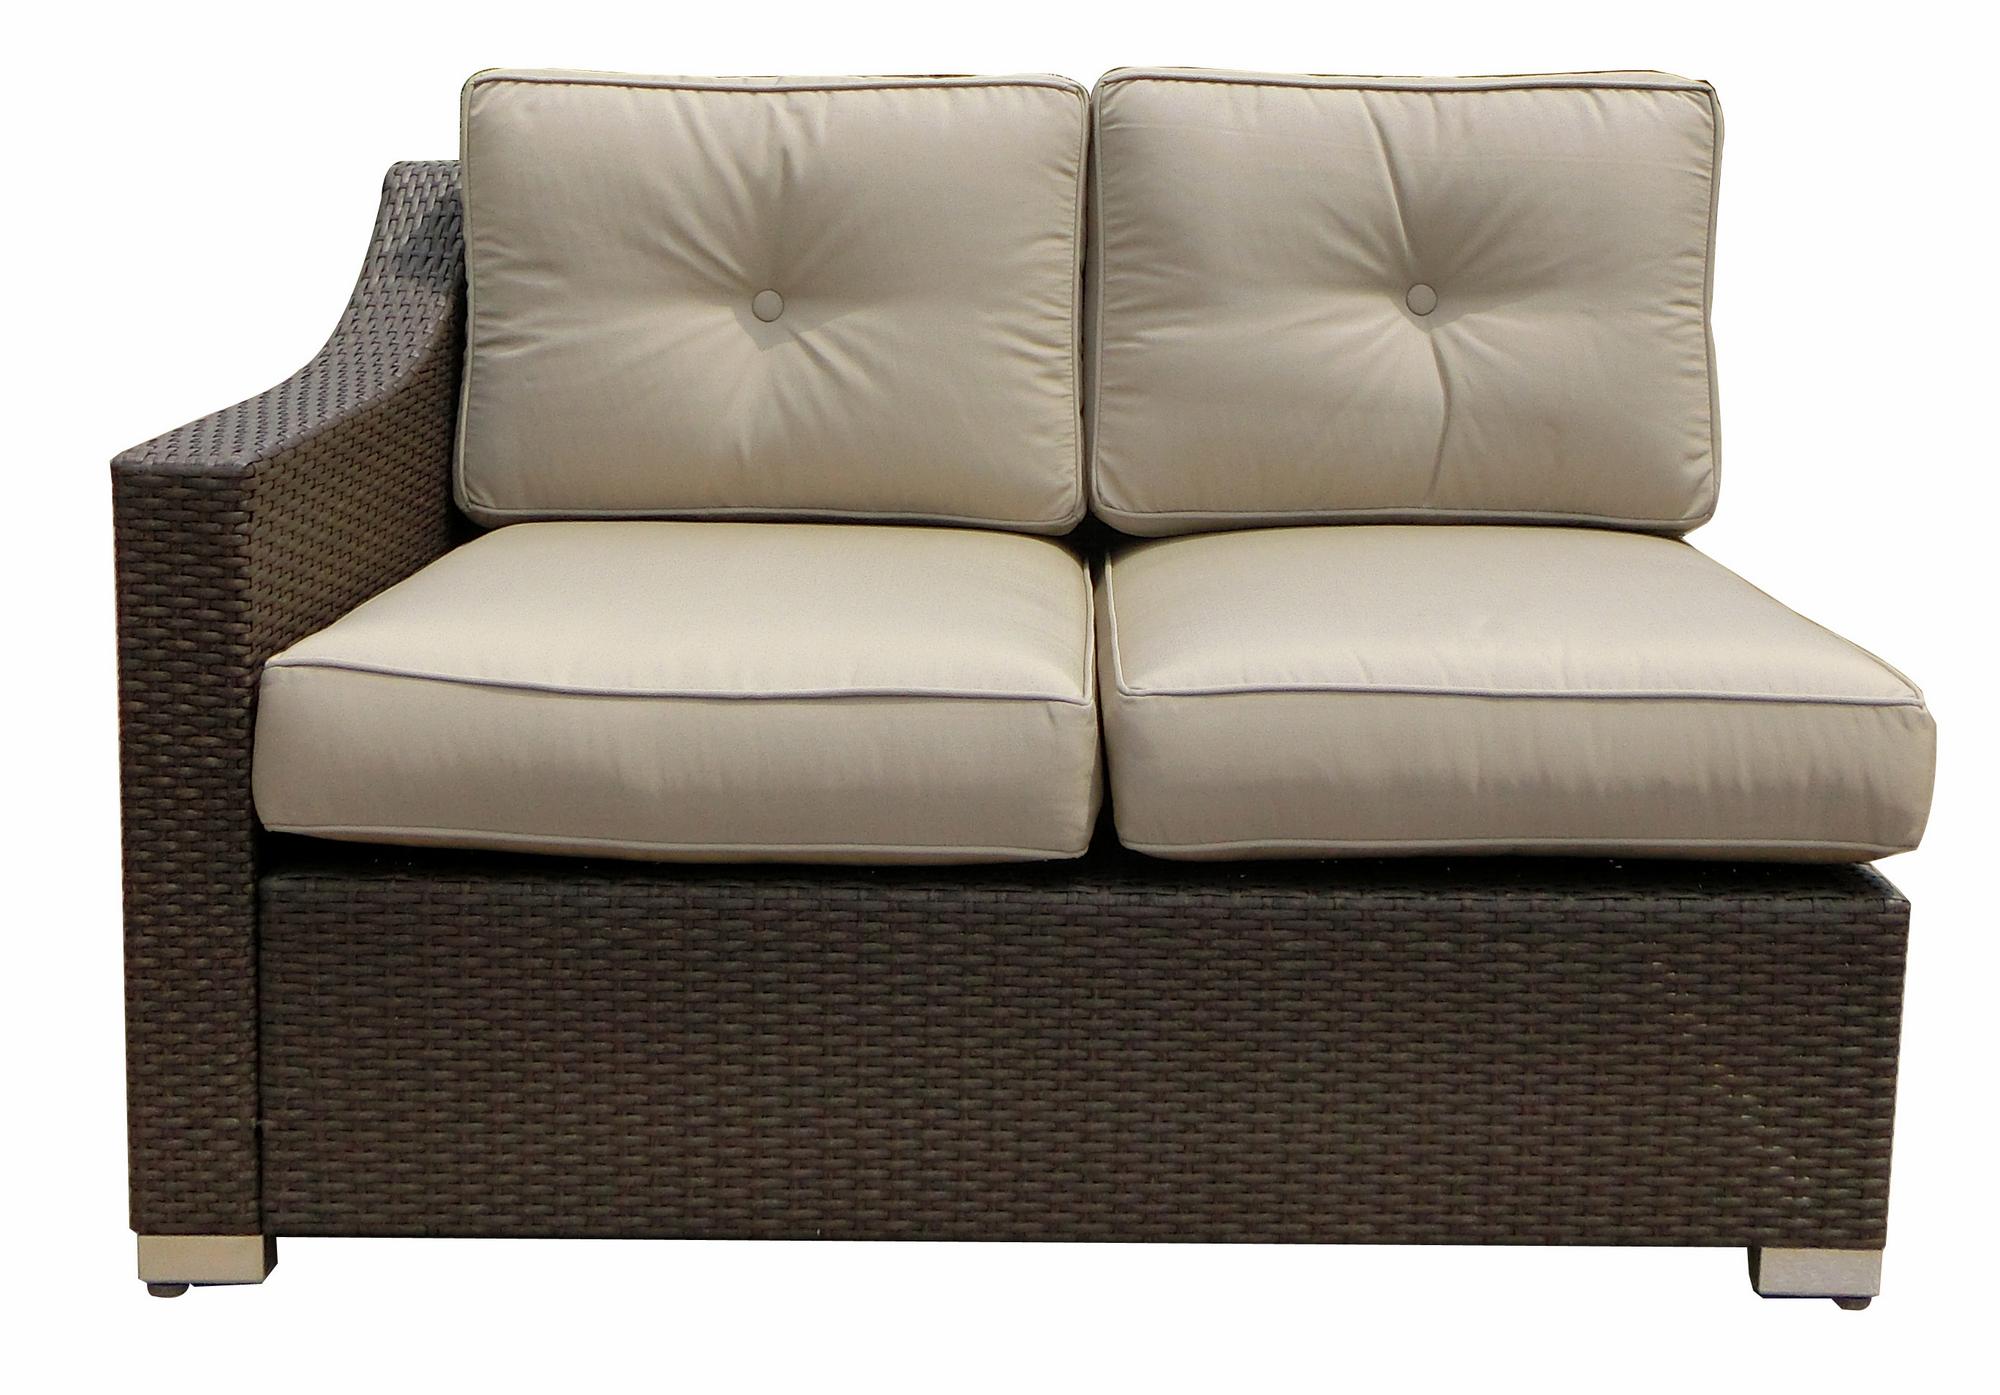 Sb-3775-08 South Beach Wicker Patio Right Arm Sectional Loveseat